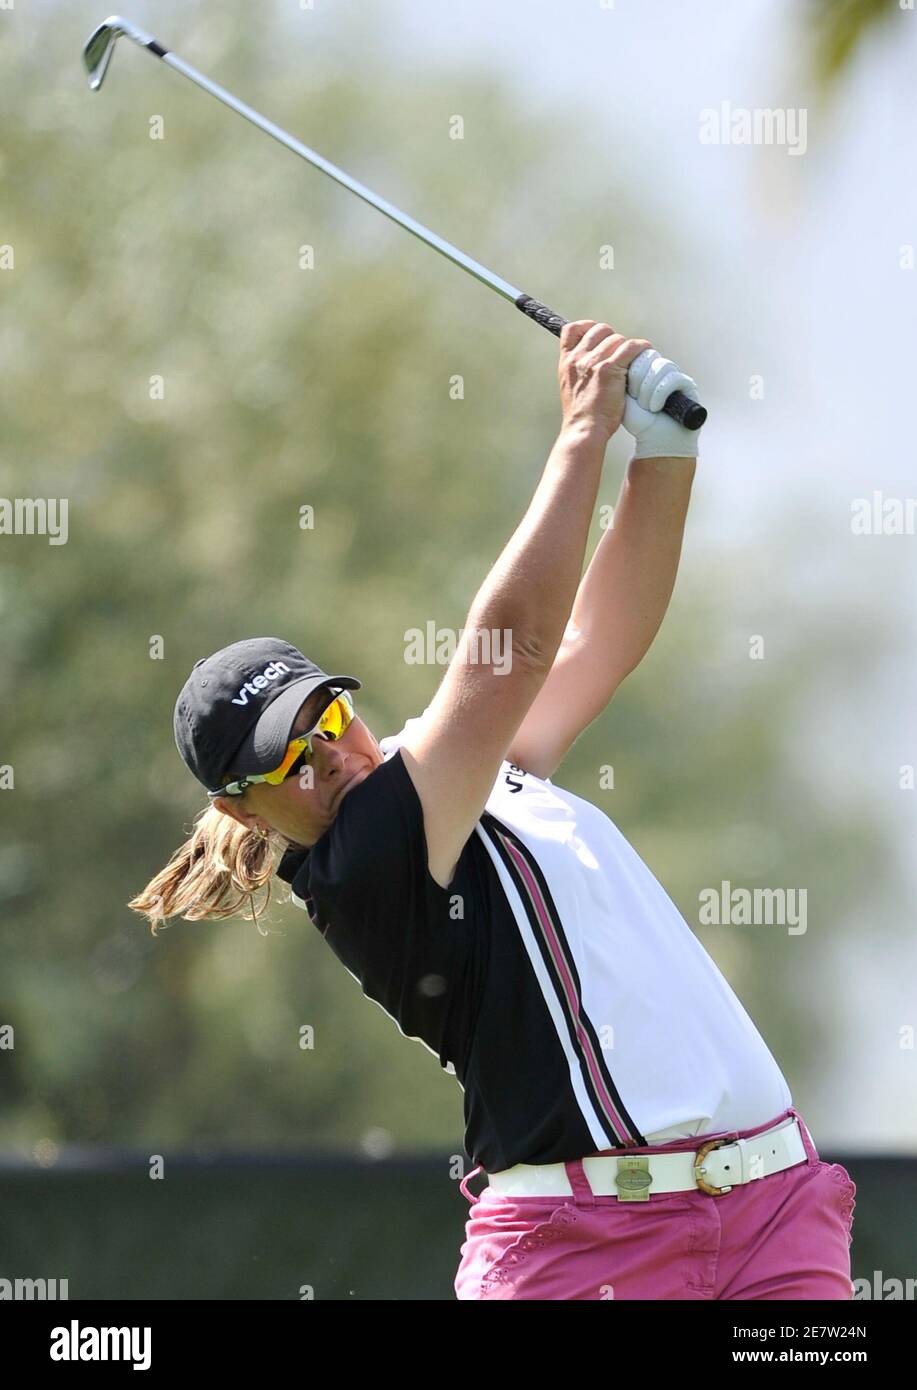 Karen Stupples of Britain drives the eighth hole during third round play of the LPGA's Kraft Nabisco Championship golf tournament in Rancho Mirage, California, April 3, 2010.  REUTERS/Gus Ruelas (UNITED STATES - Tags: SPORT GOLF) Stock Photo